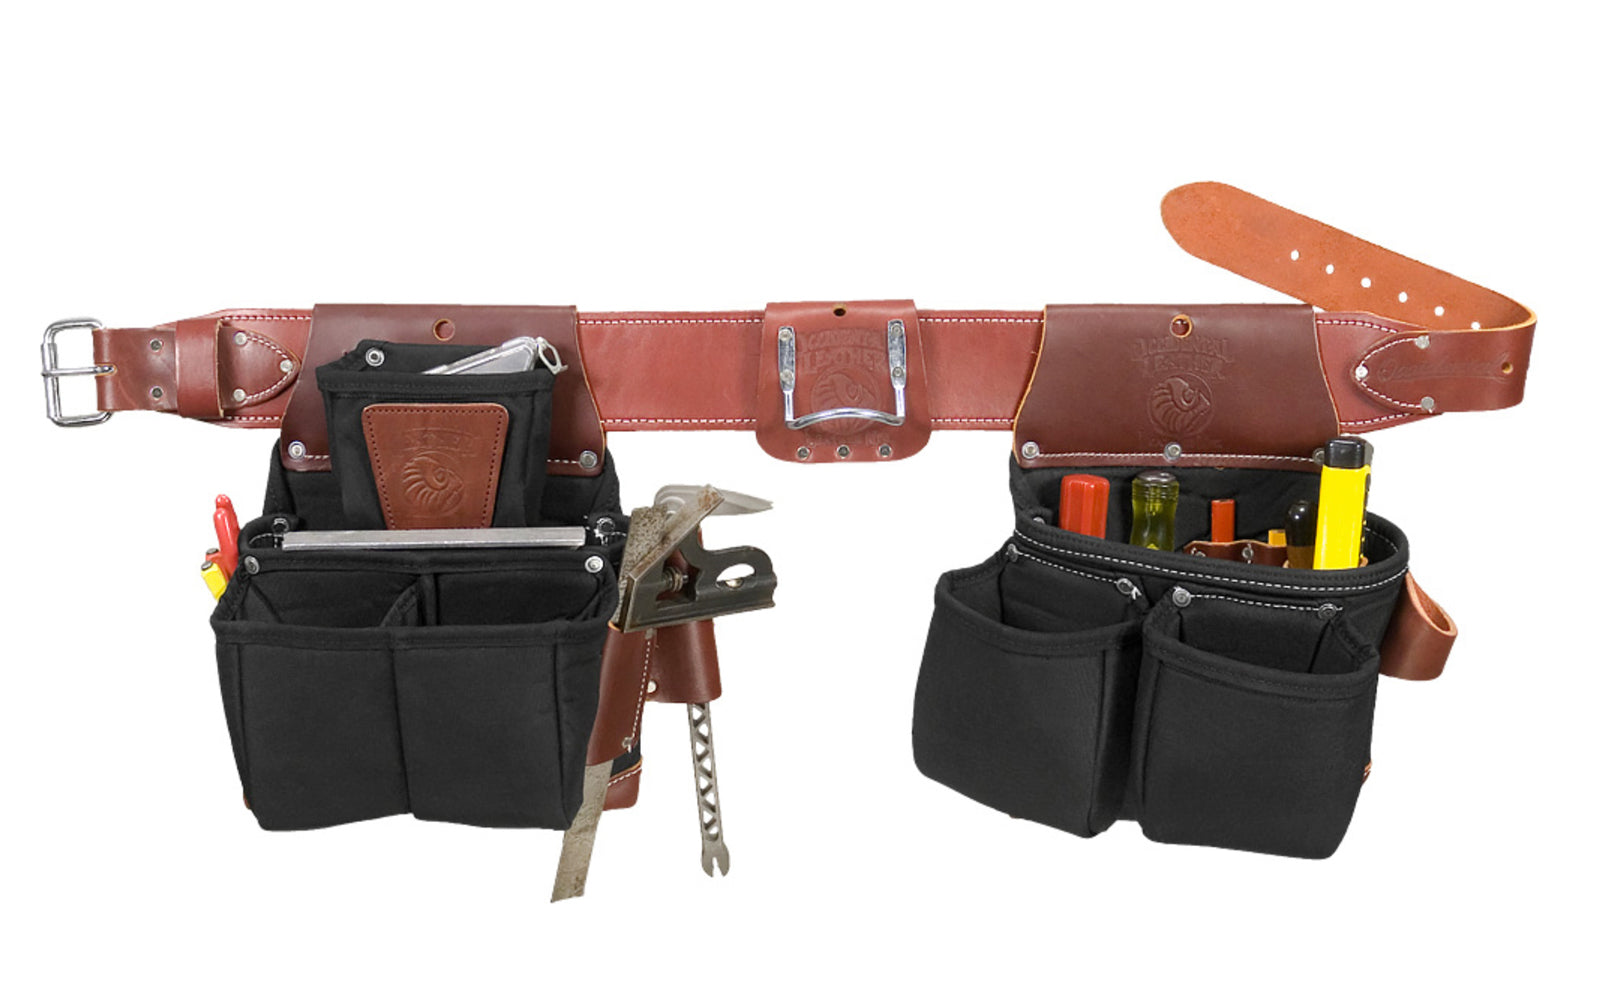 Occidental Leather "OxyLights" Ultra Framer Tool Belt Set ~ 8086 M ~ Medium Belt Size (3" Medium Ranger Work Belt) - Padded Two Ply Tool Bags Keep Shape - 21 pockets - 759244197808. Extremely Abrasion Resistant Industrial Nylon - "OxyLights" 8086 Tool Belt Package - Industrial Nylon Material for heavy use. Made in USA